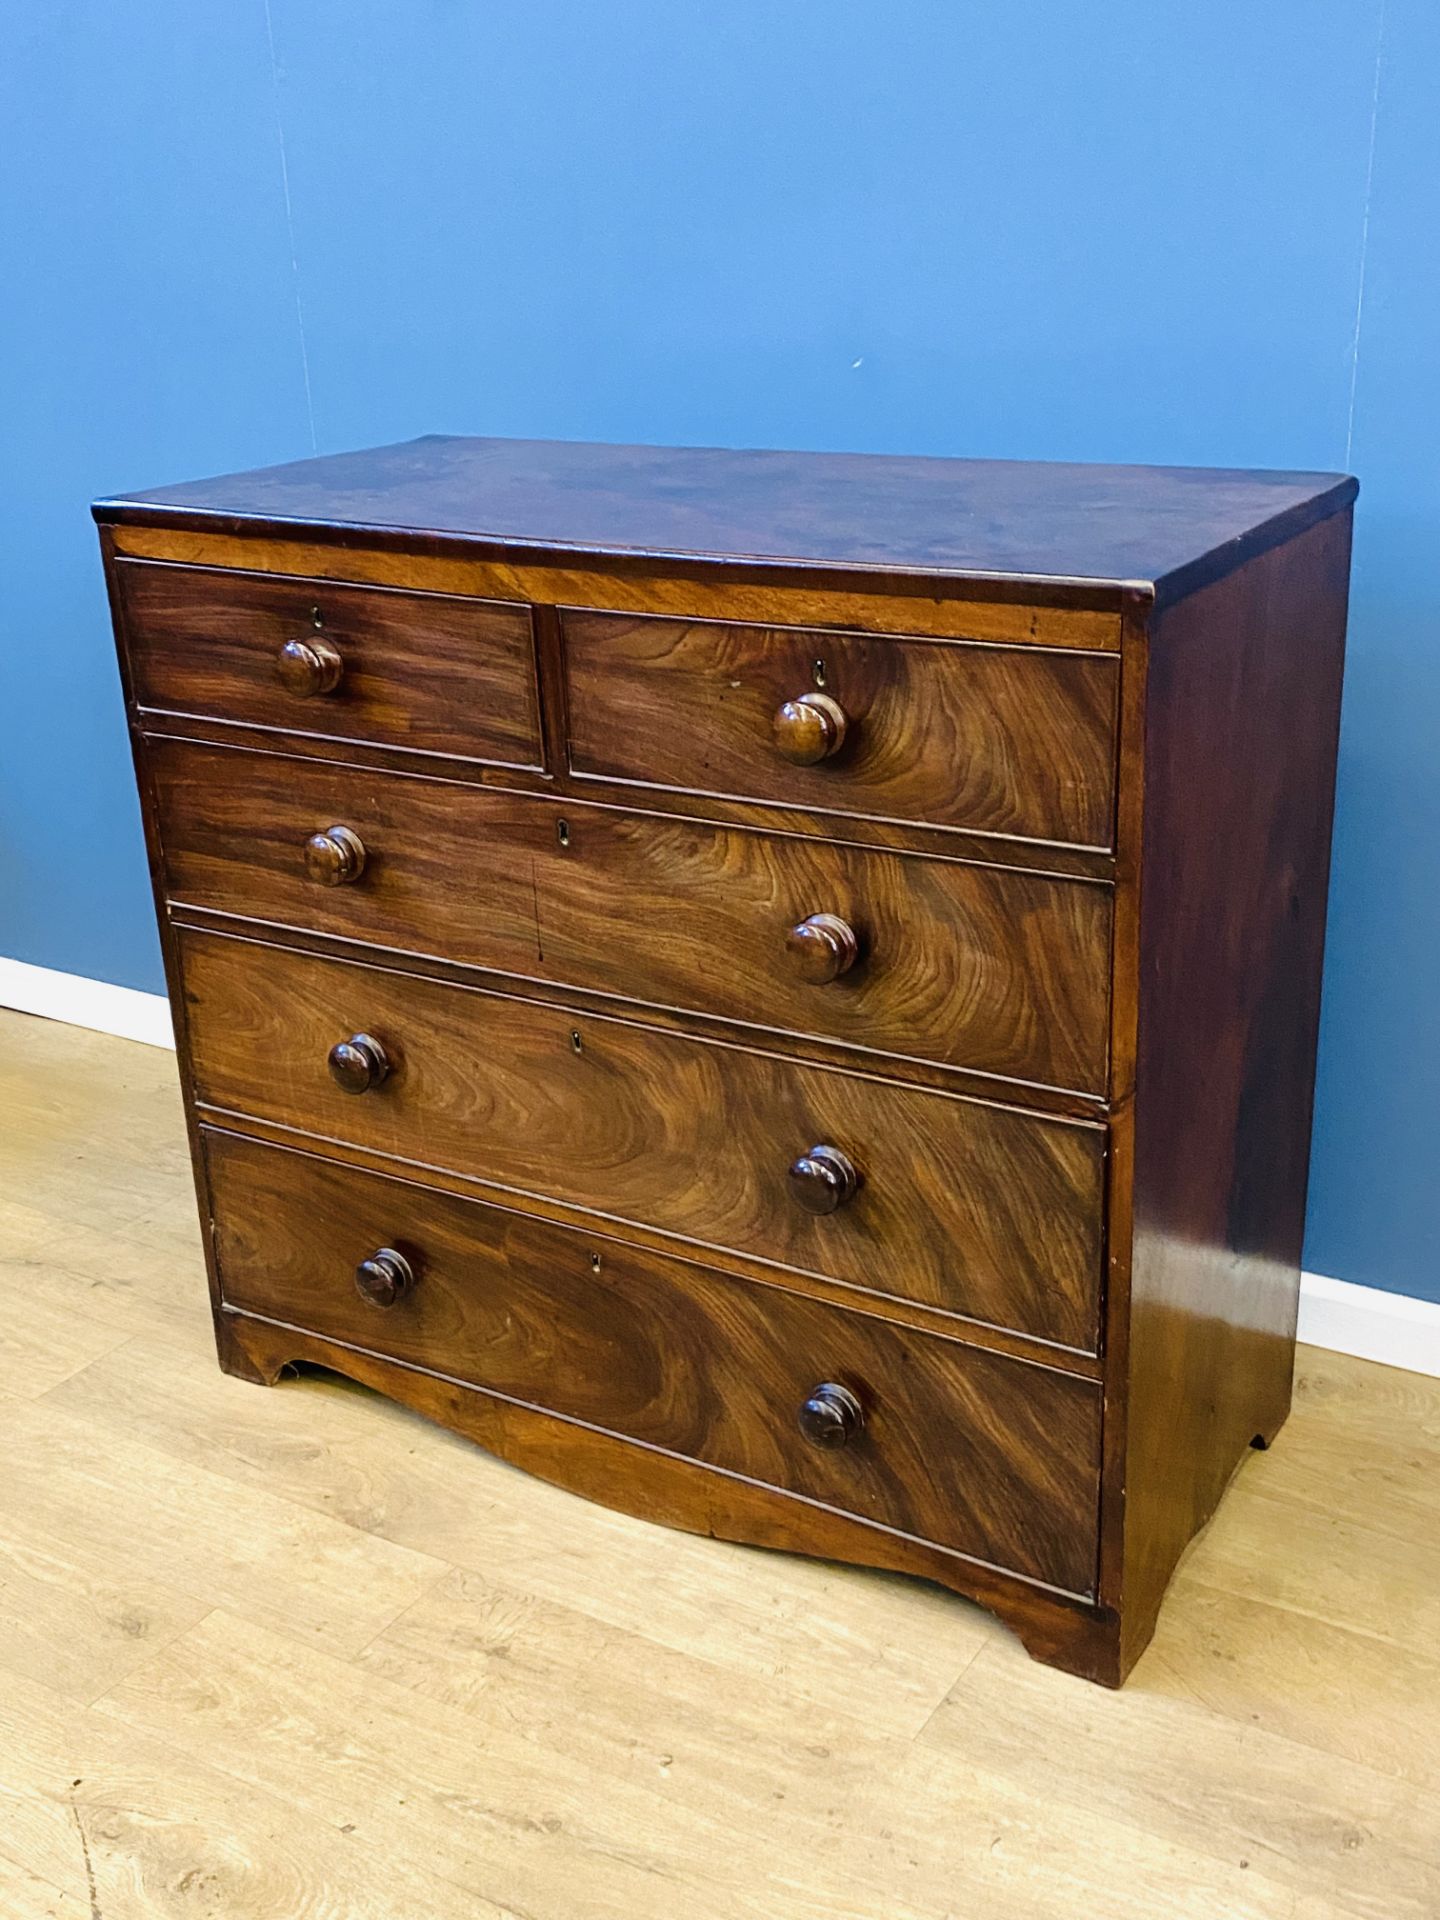 Mahogany chest of drawers - Image 4 of 5